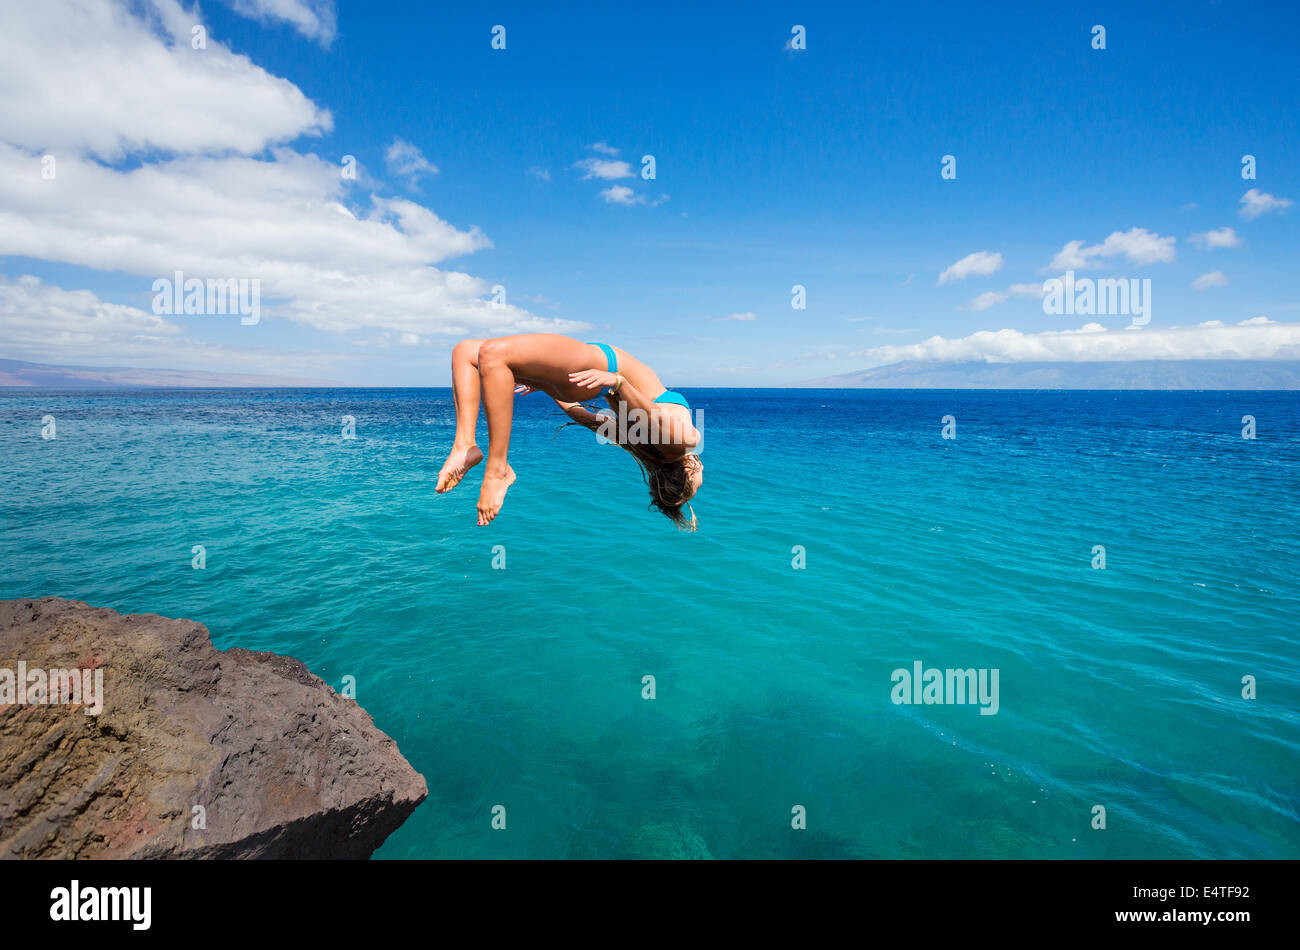 Woman doing backflip off cliff into the ocean. Summer fun lifestyle. Stock Photo